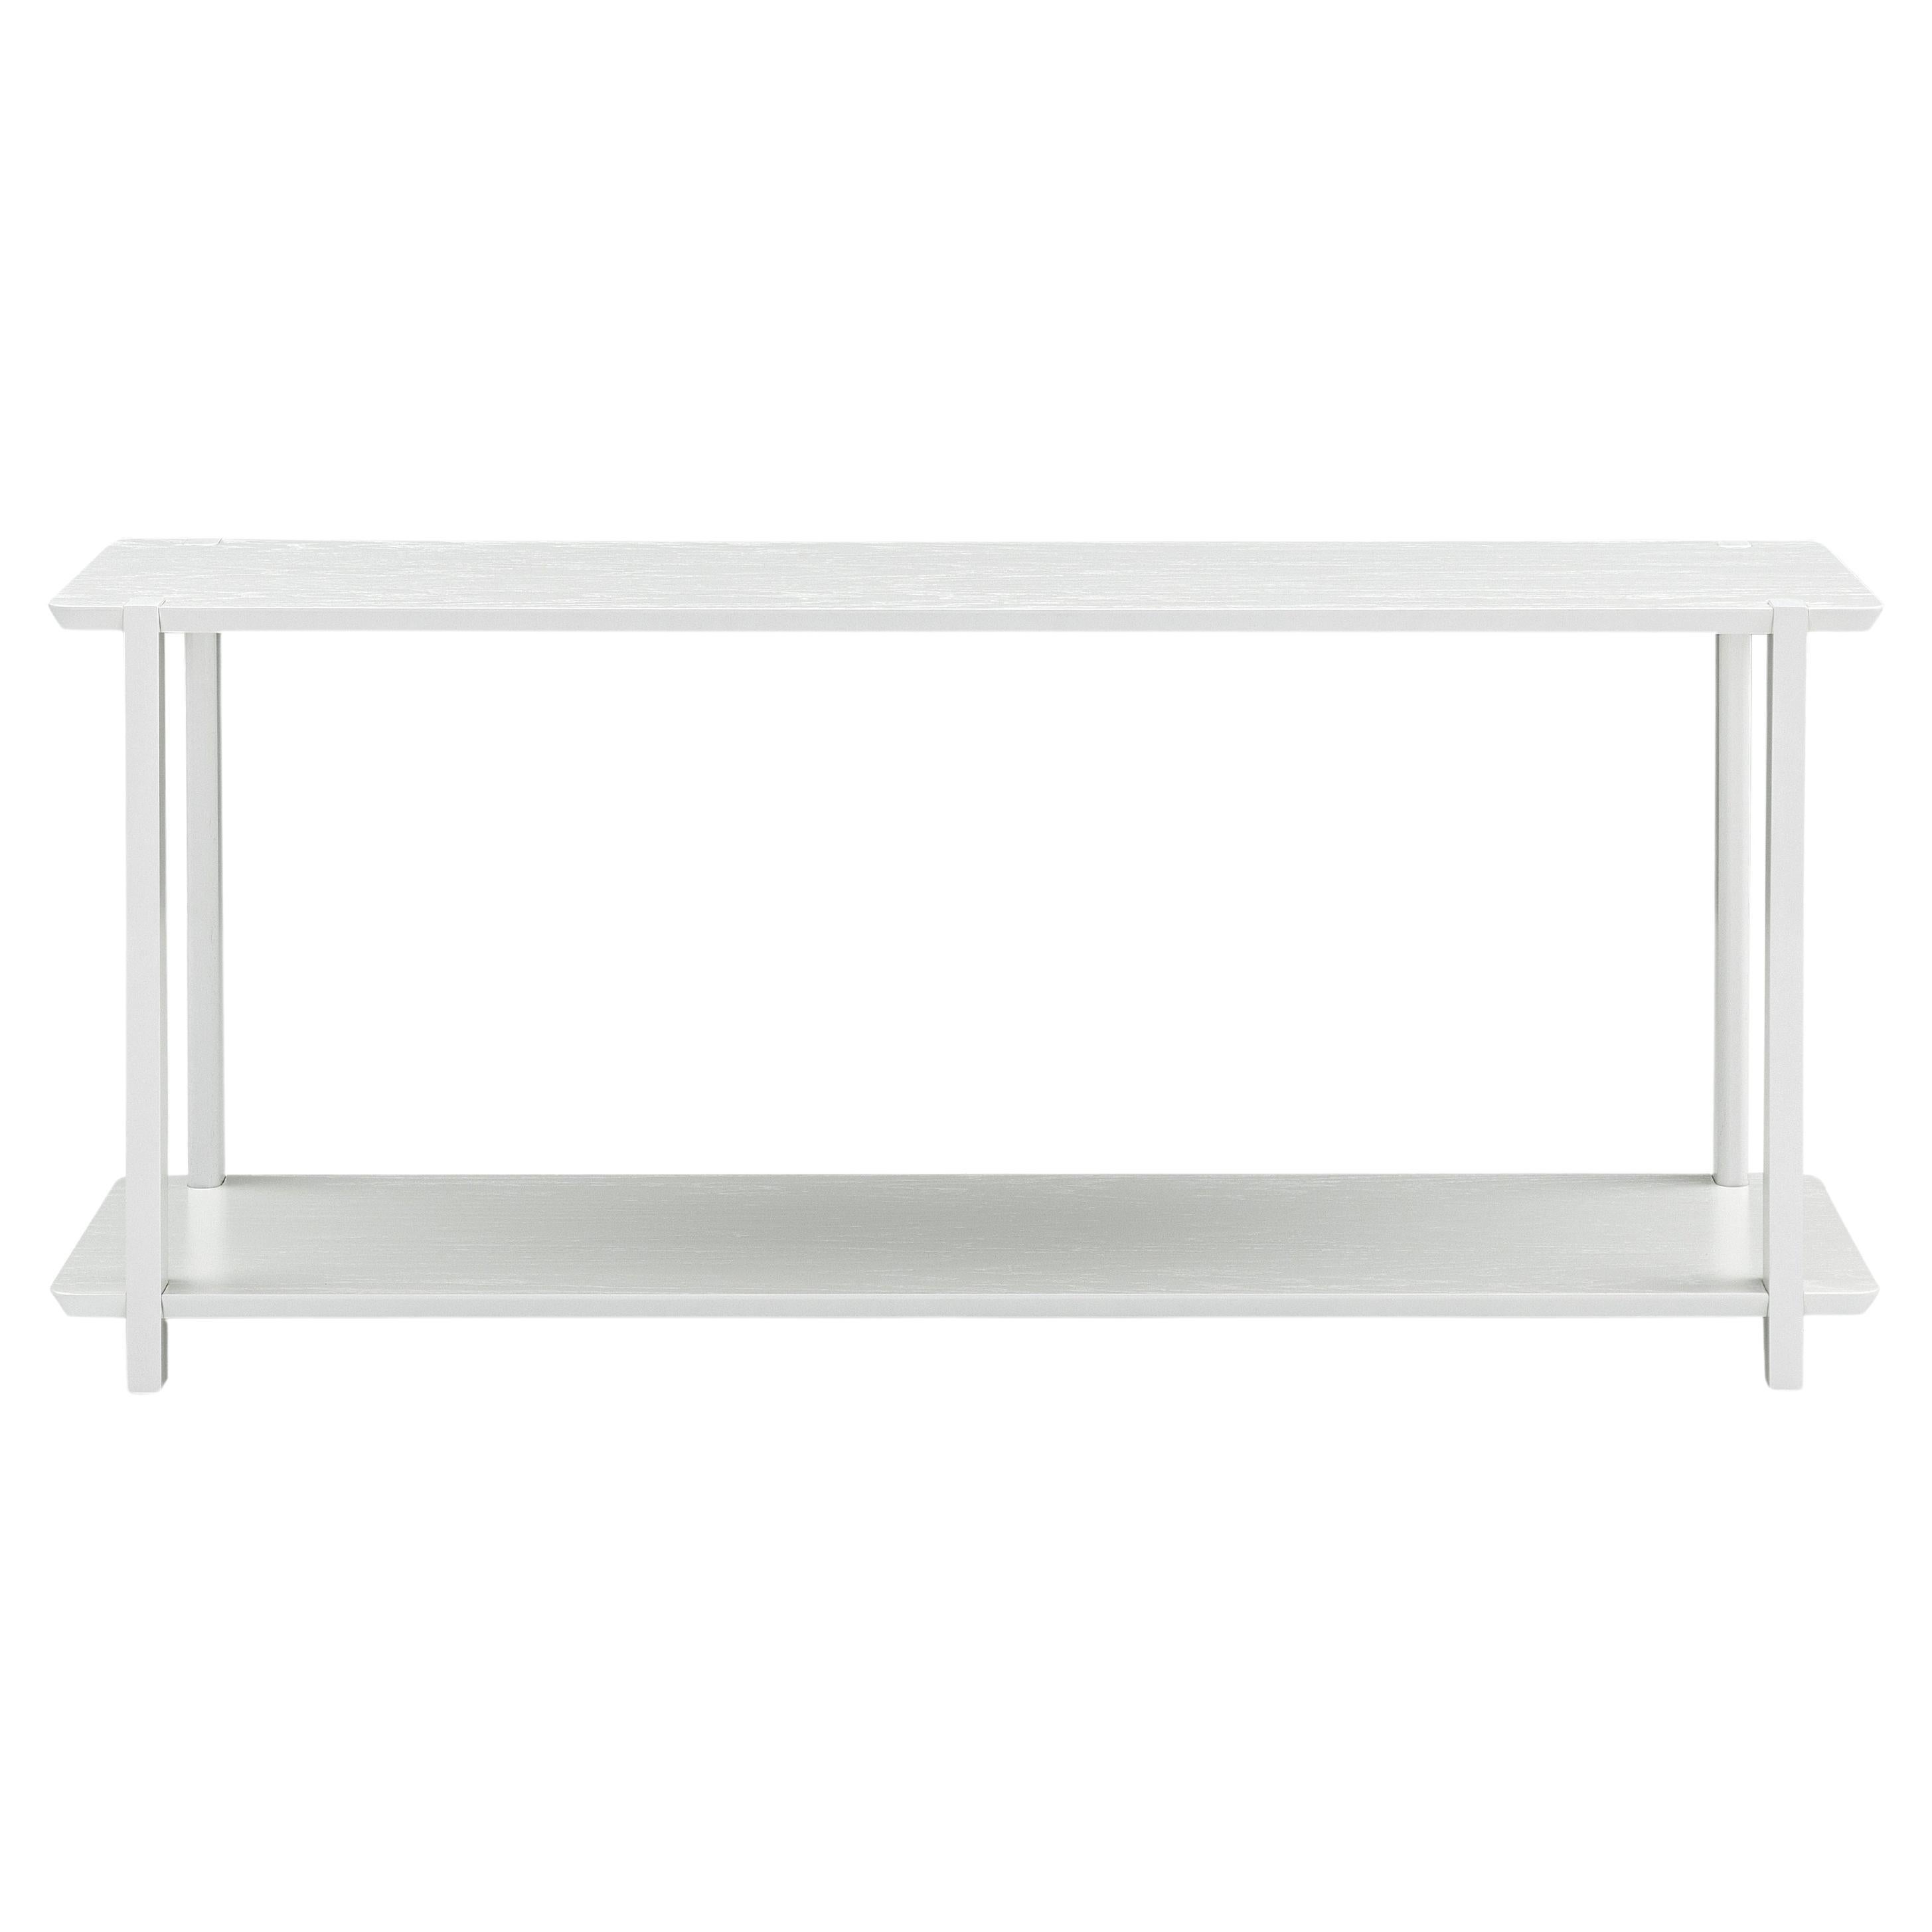 The Clan console is yet another Uultis case piece that combines style and functionality with its white solid wood finish and laminated MDF-frame top. This console can be used in a variety of rooms in your home, including the bedroom, living room, or